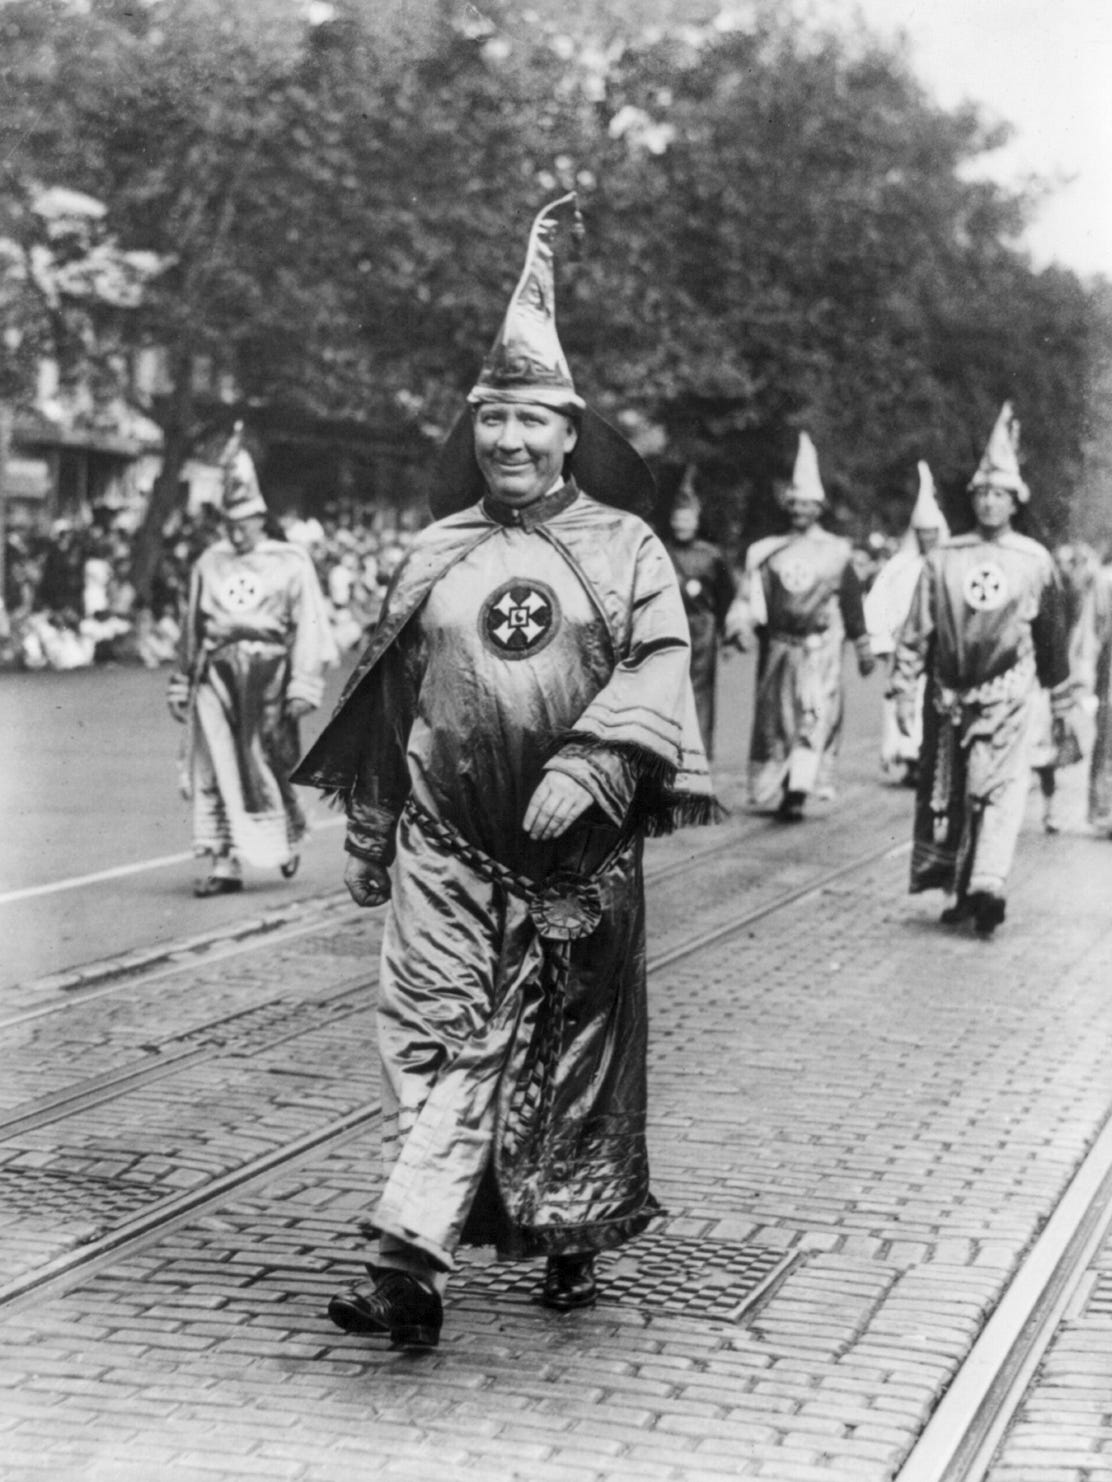 Dr. H.W. Evans, Imperial Wizard of the Ku Klux Klan, leads his Knights of the Klan in a 1926 parade in Washington, D.C. "The KKK was founded as an anti-Republican organization, not an anti-black organization," state Sen. Patrick Colbeck wrote as part of his proposed revision to social studies standards for K-12 students.